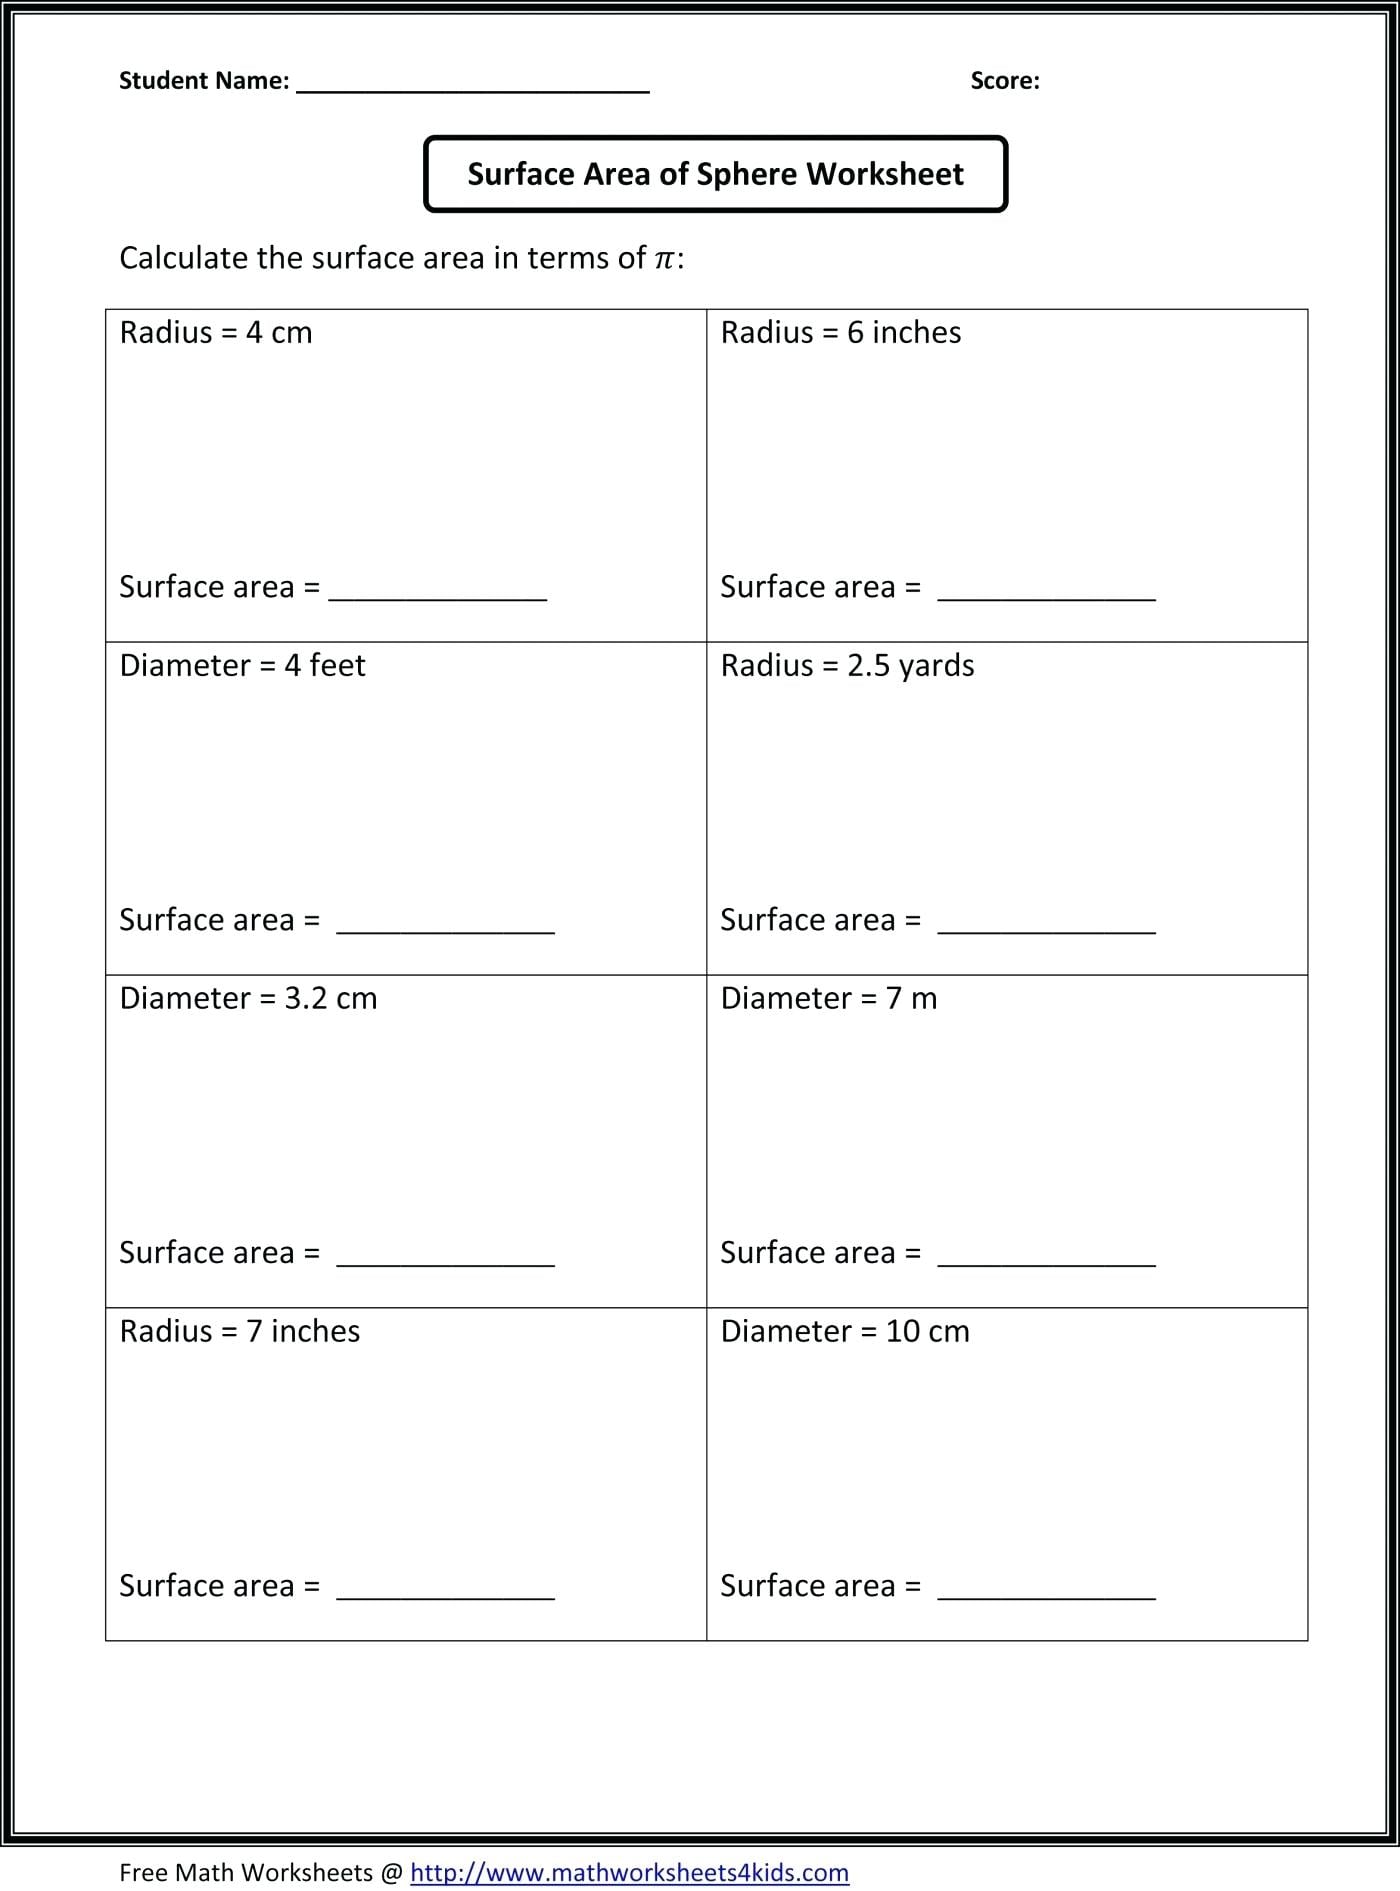 Carpentry Math Worksheets 4th Grade Word Problems Pdf Best Of Long